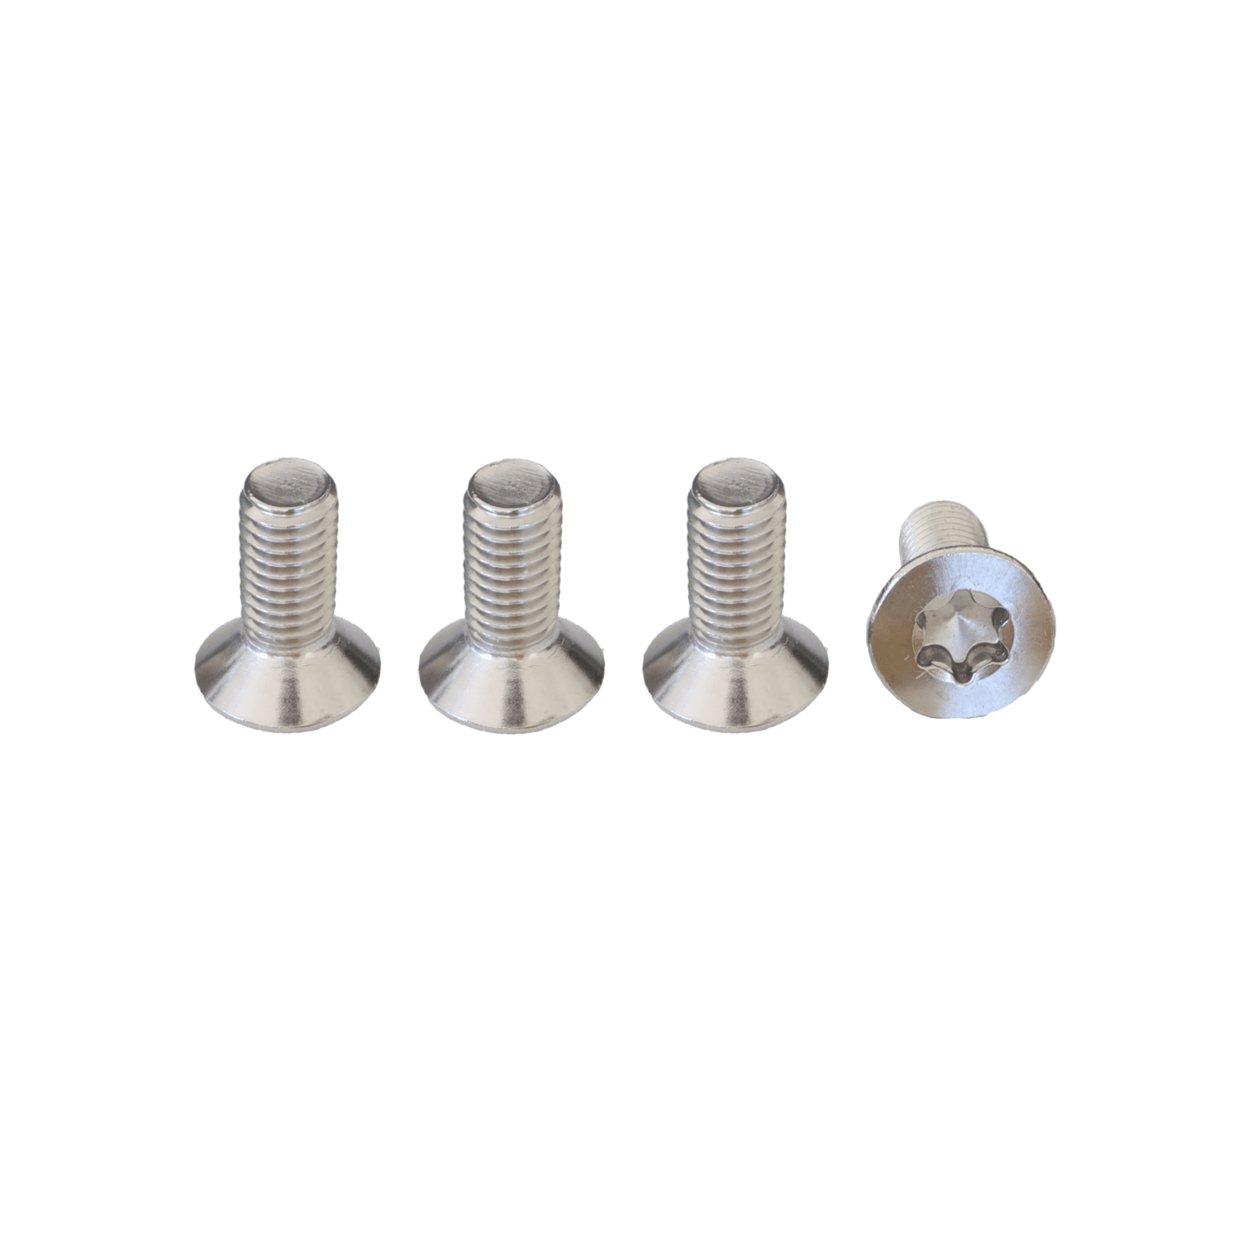 Fanatic X Screw Set Foil Sky Air for track nuts TX (4pcs) 2023 - Worthing Watersports - 9010583128580 - Spareparts - Fanatic X